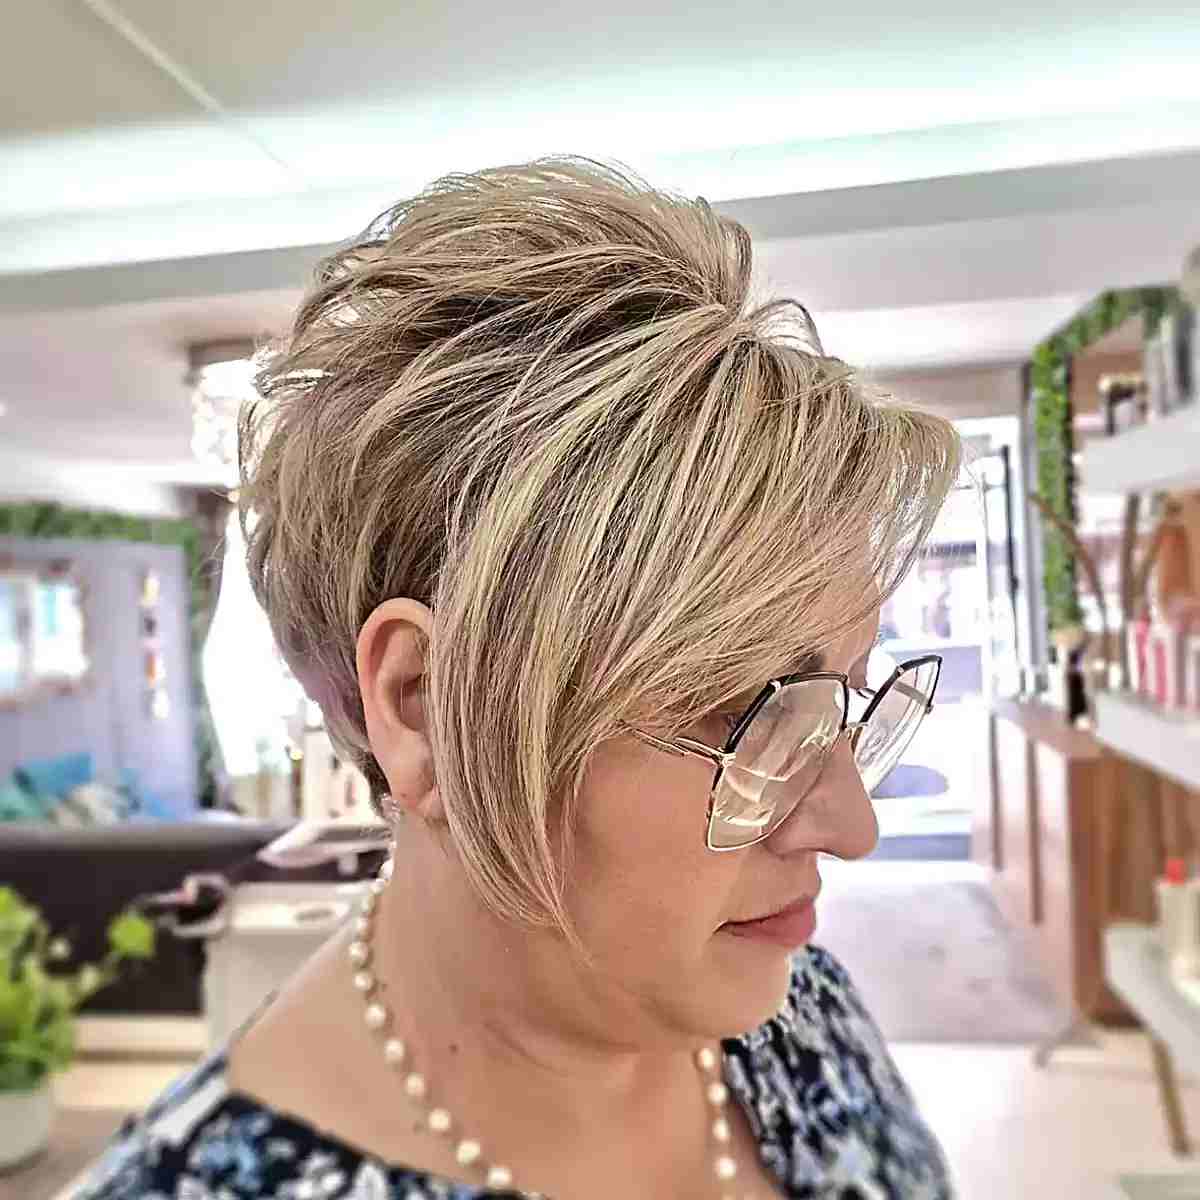 Classic Long Pixie Crop with Crown Layers and Long Fringe for Older Women with Specs